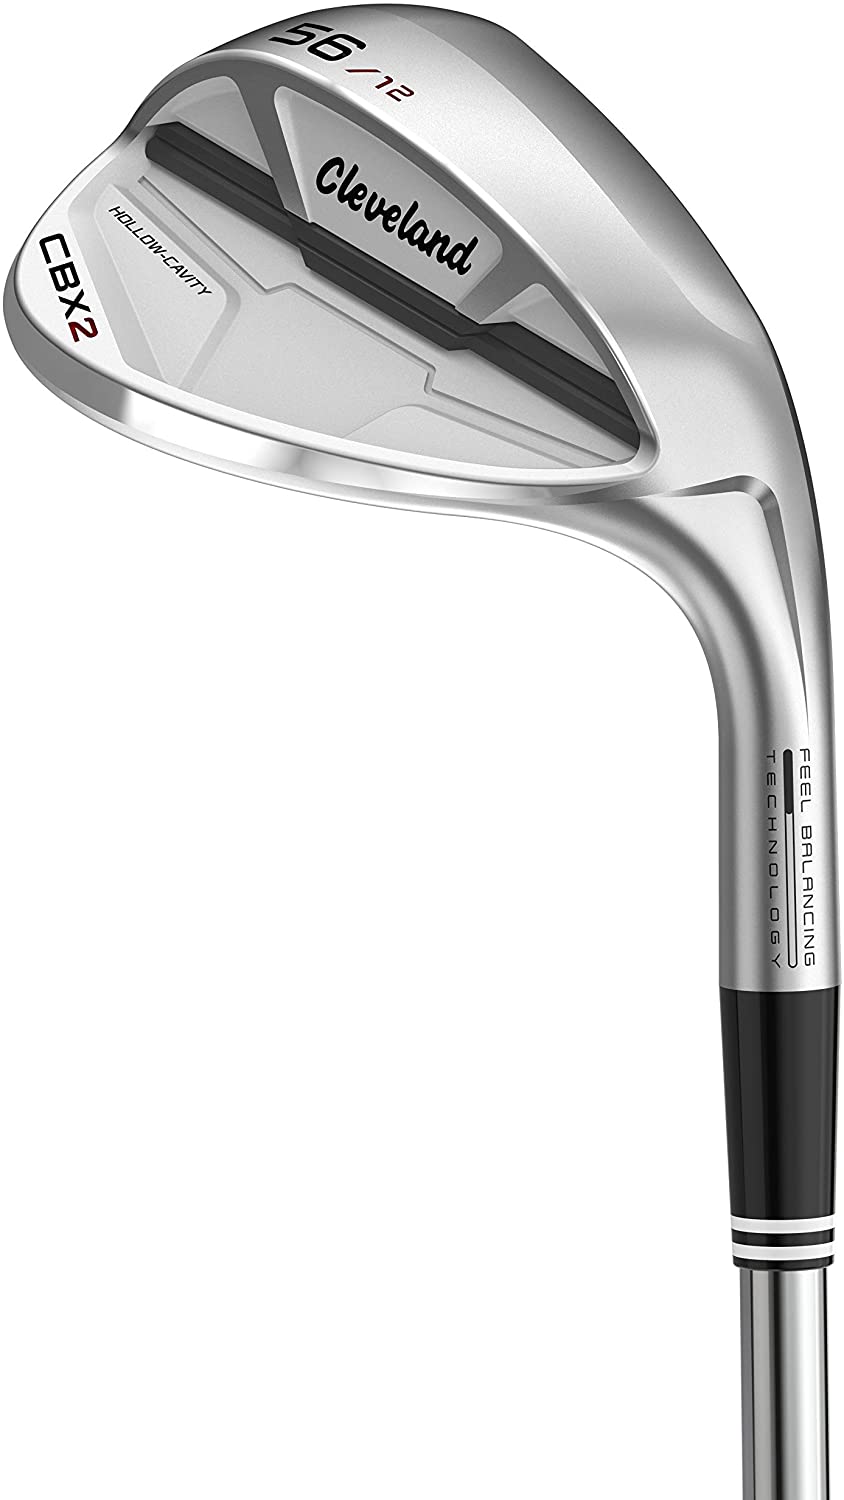 Cleveland Golf CBX 2 Wedge Review